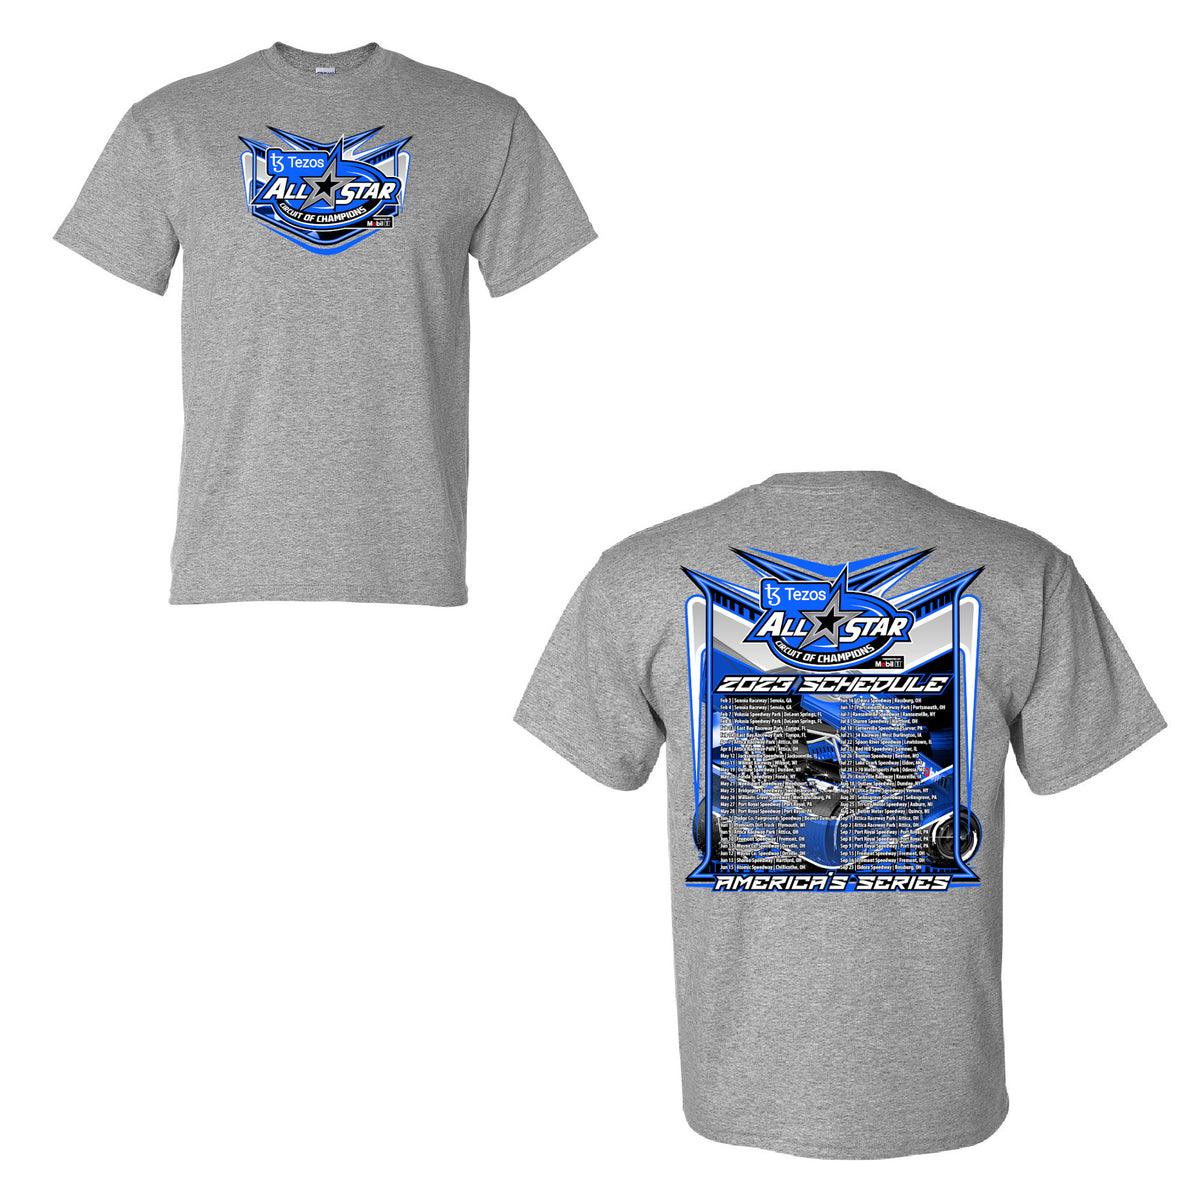 PERFORMANCE SHIRTS - 2023 Circuit of Champions WEST VIRGINIA